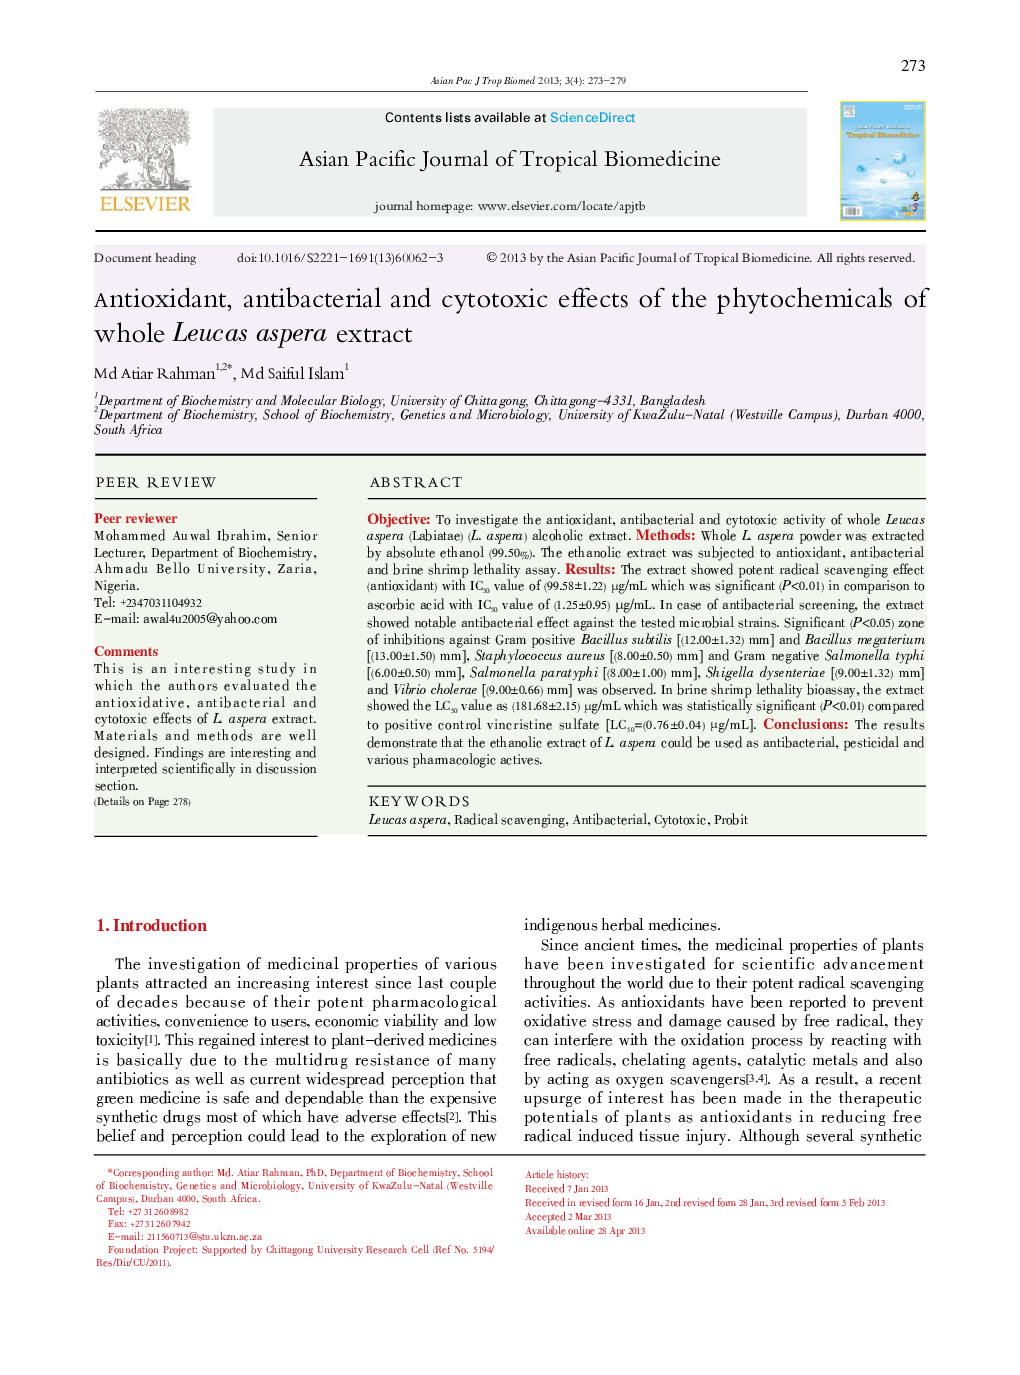 Antioxidant, antibacterial and cytotoxic effects of the phytochemicals of whole Leucas aspera extract